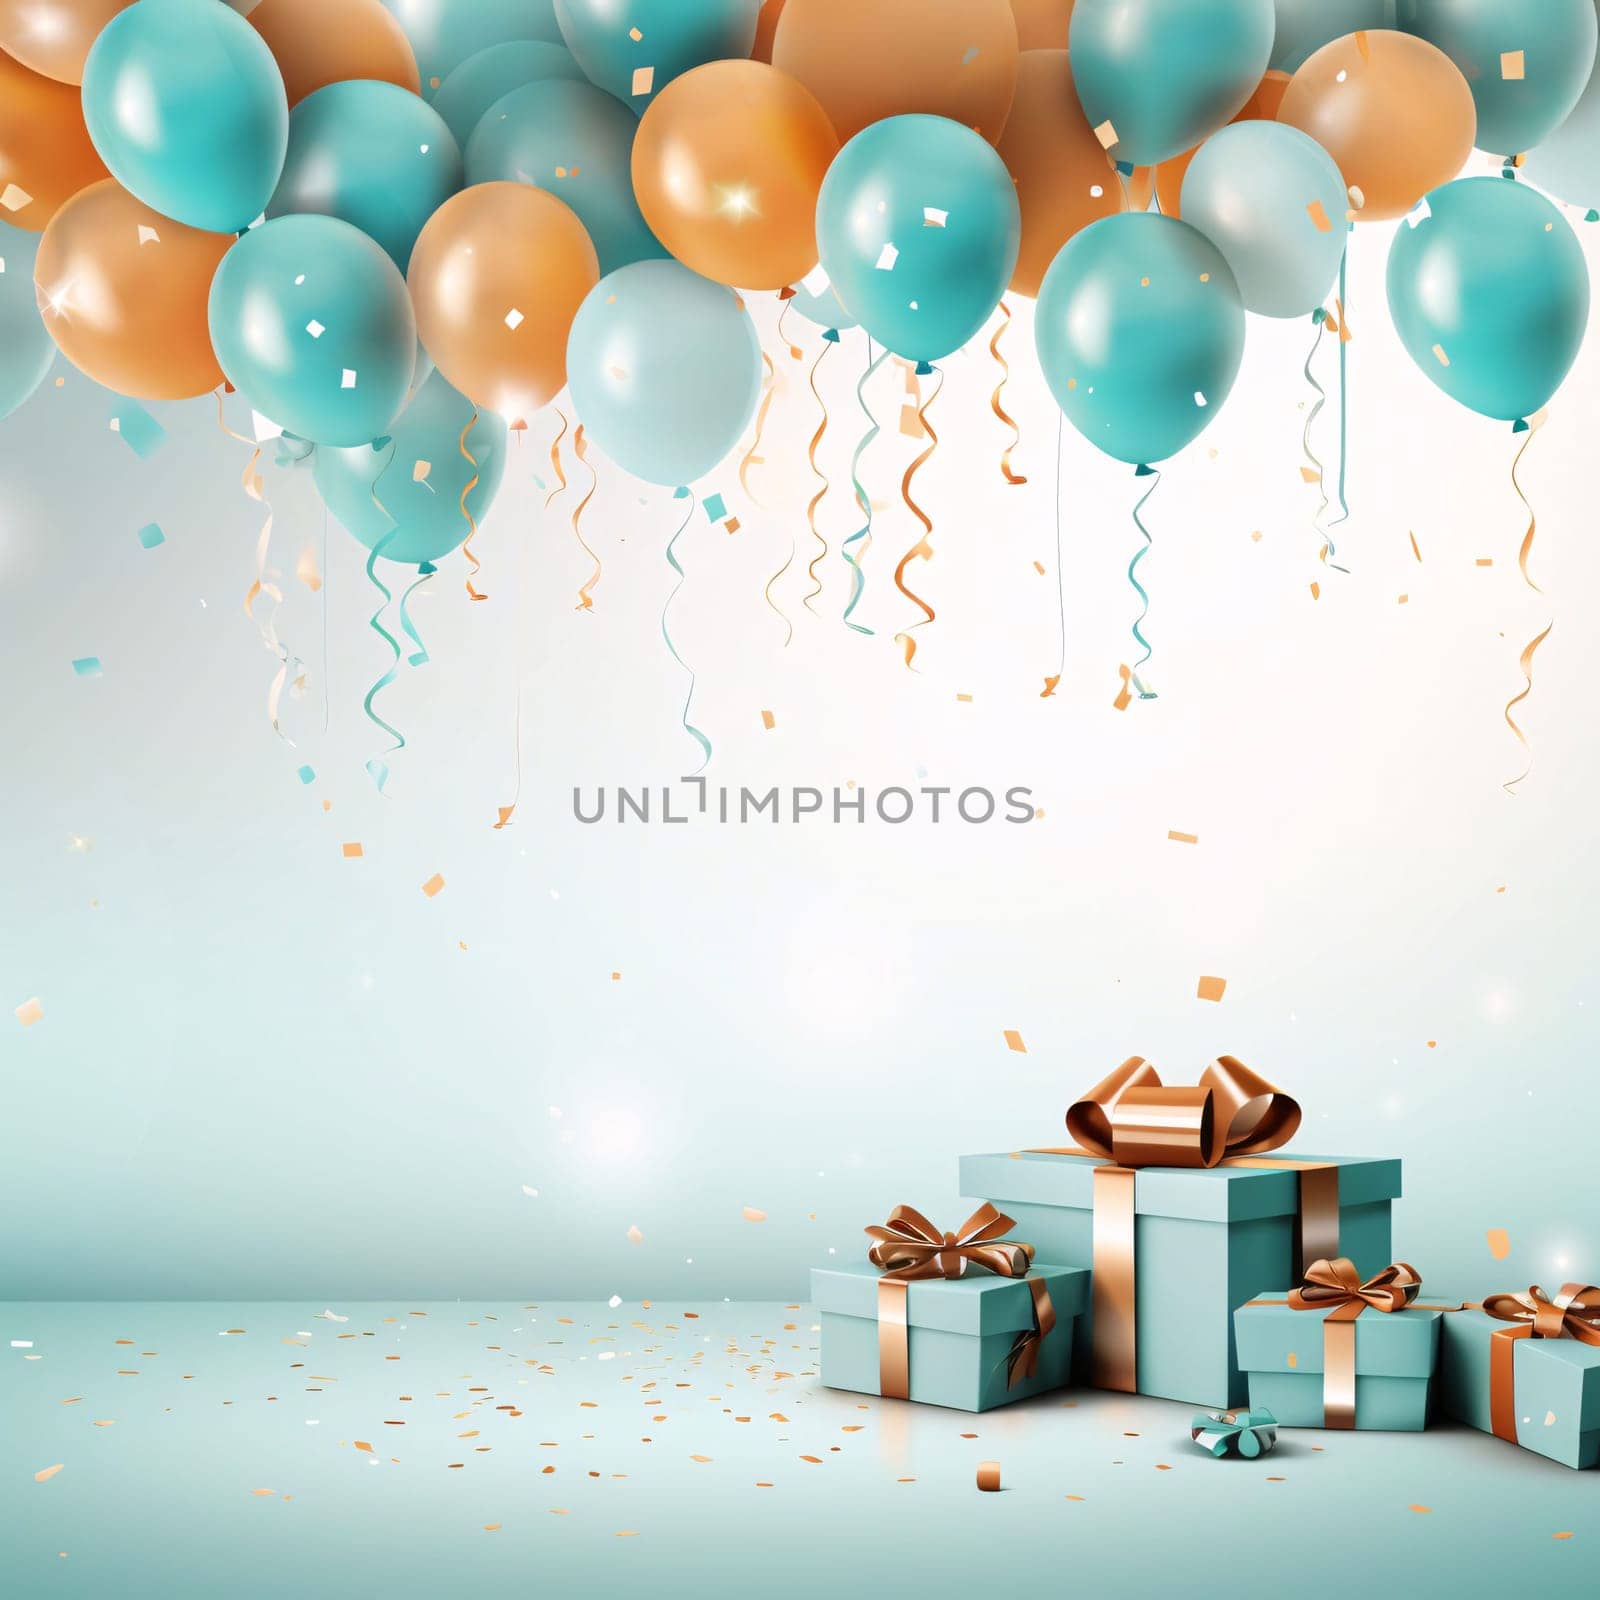 Bright gift boxes with orange bows. Blue and orange balloons, confetti and streamers.Valentine's Day banner with space for your own content. Heart as a symbol of affection and love.